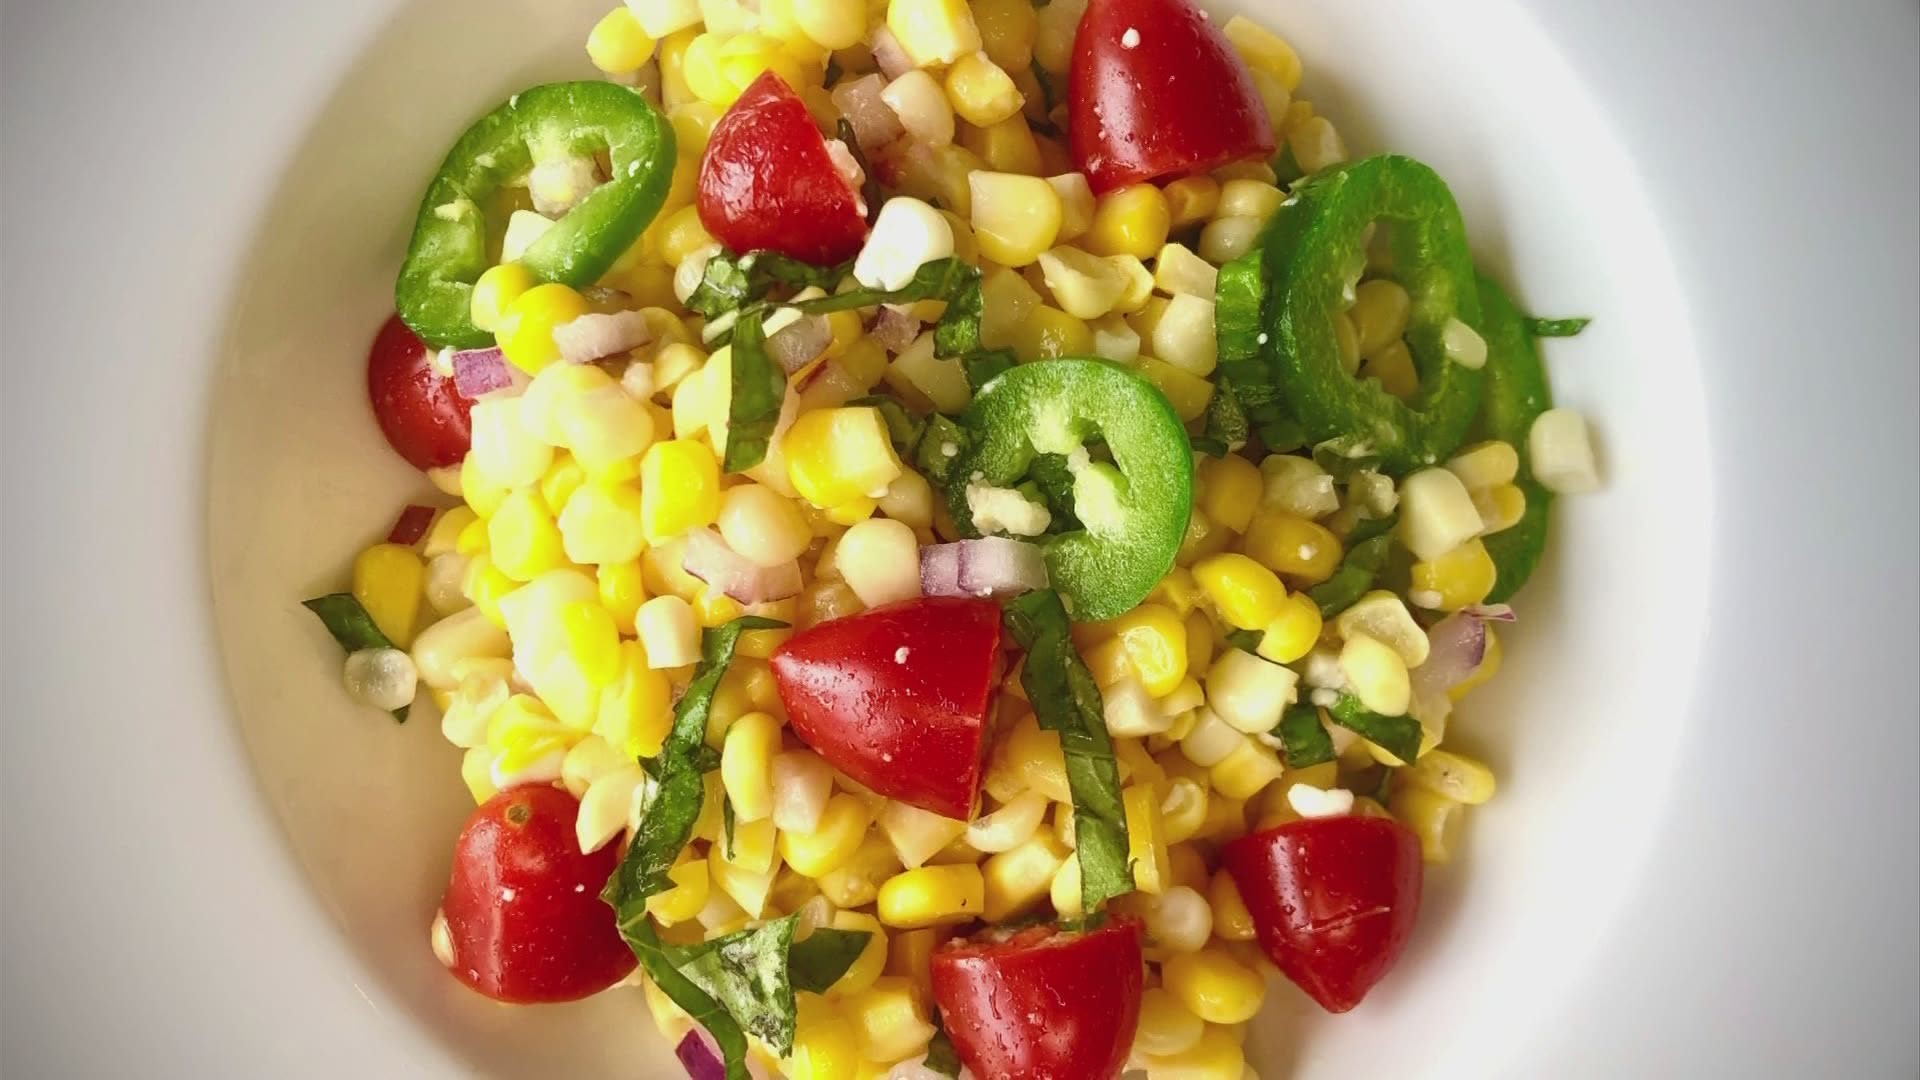 A fun corn salad for your Memorial Day cook out.